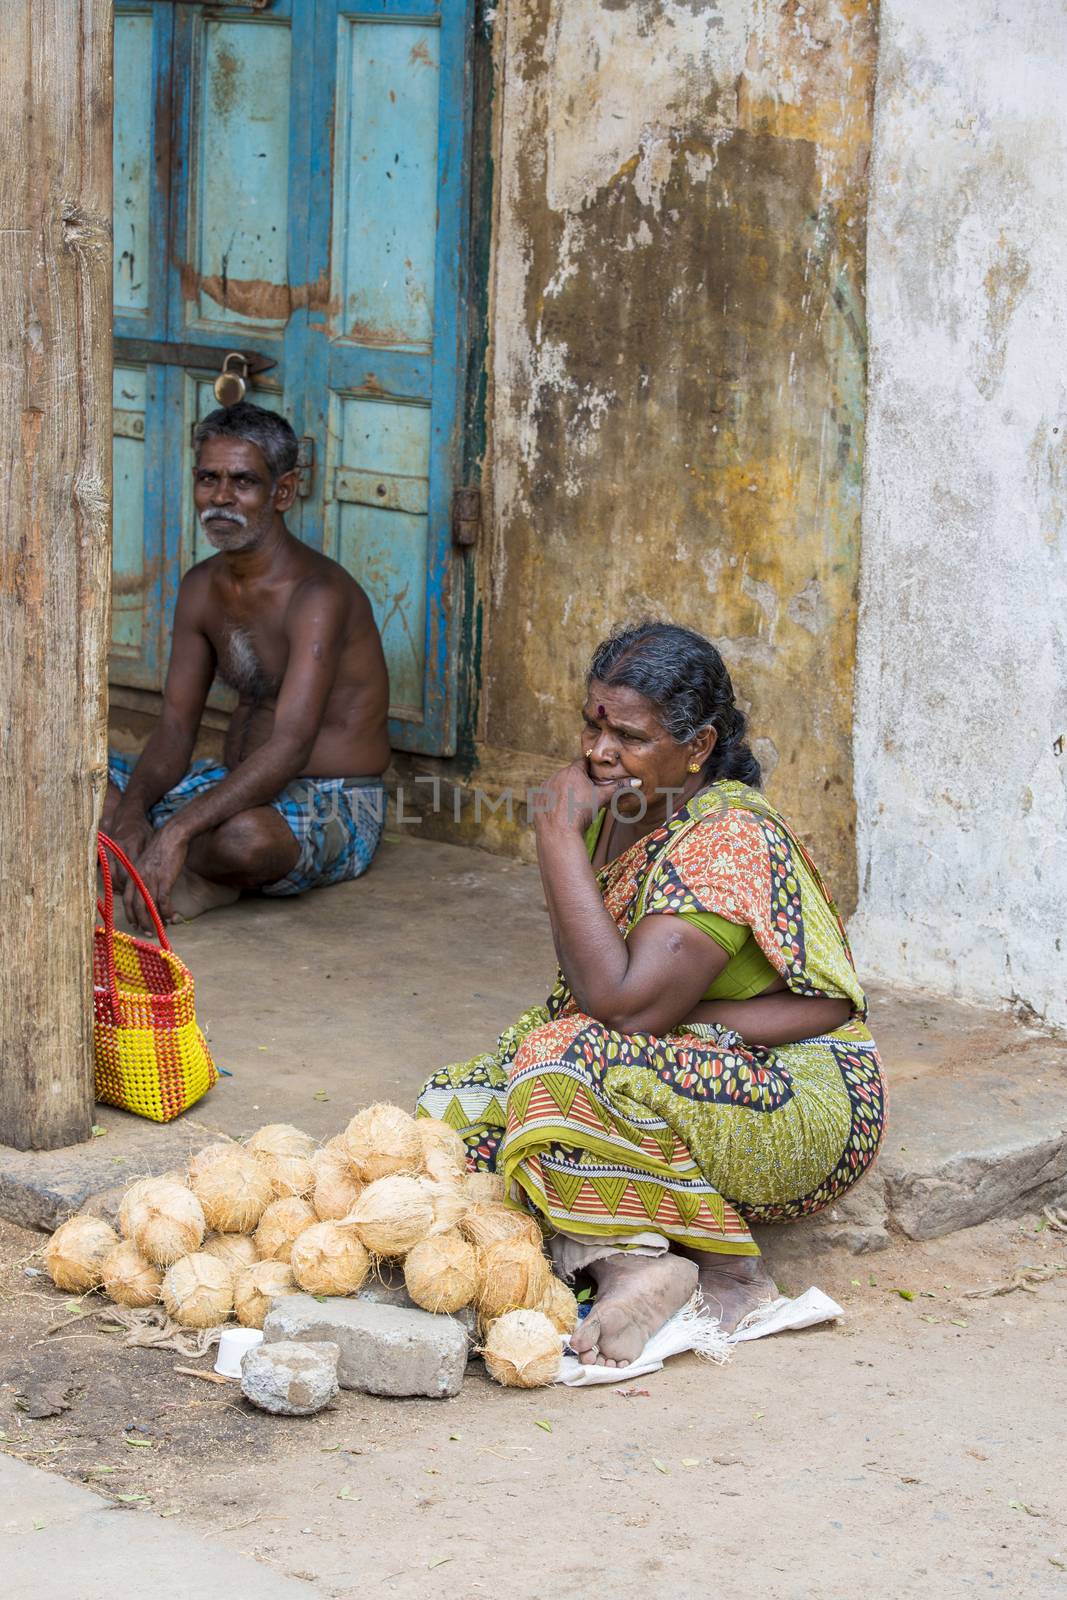 Documentary editorial image. Pondicherry, Tamil Nadu, India - May 28 2014. Very poor man and woman sitting in the street, trying to sell their fruits for money. Poverty in the world